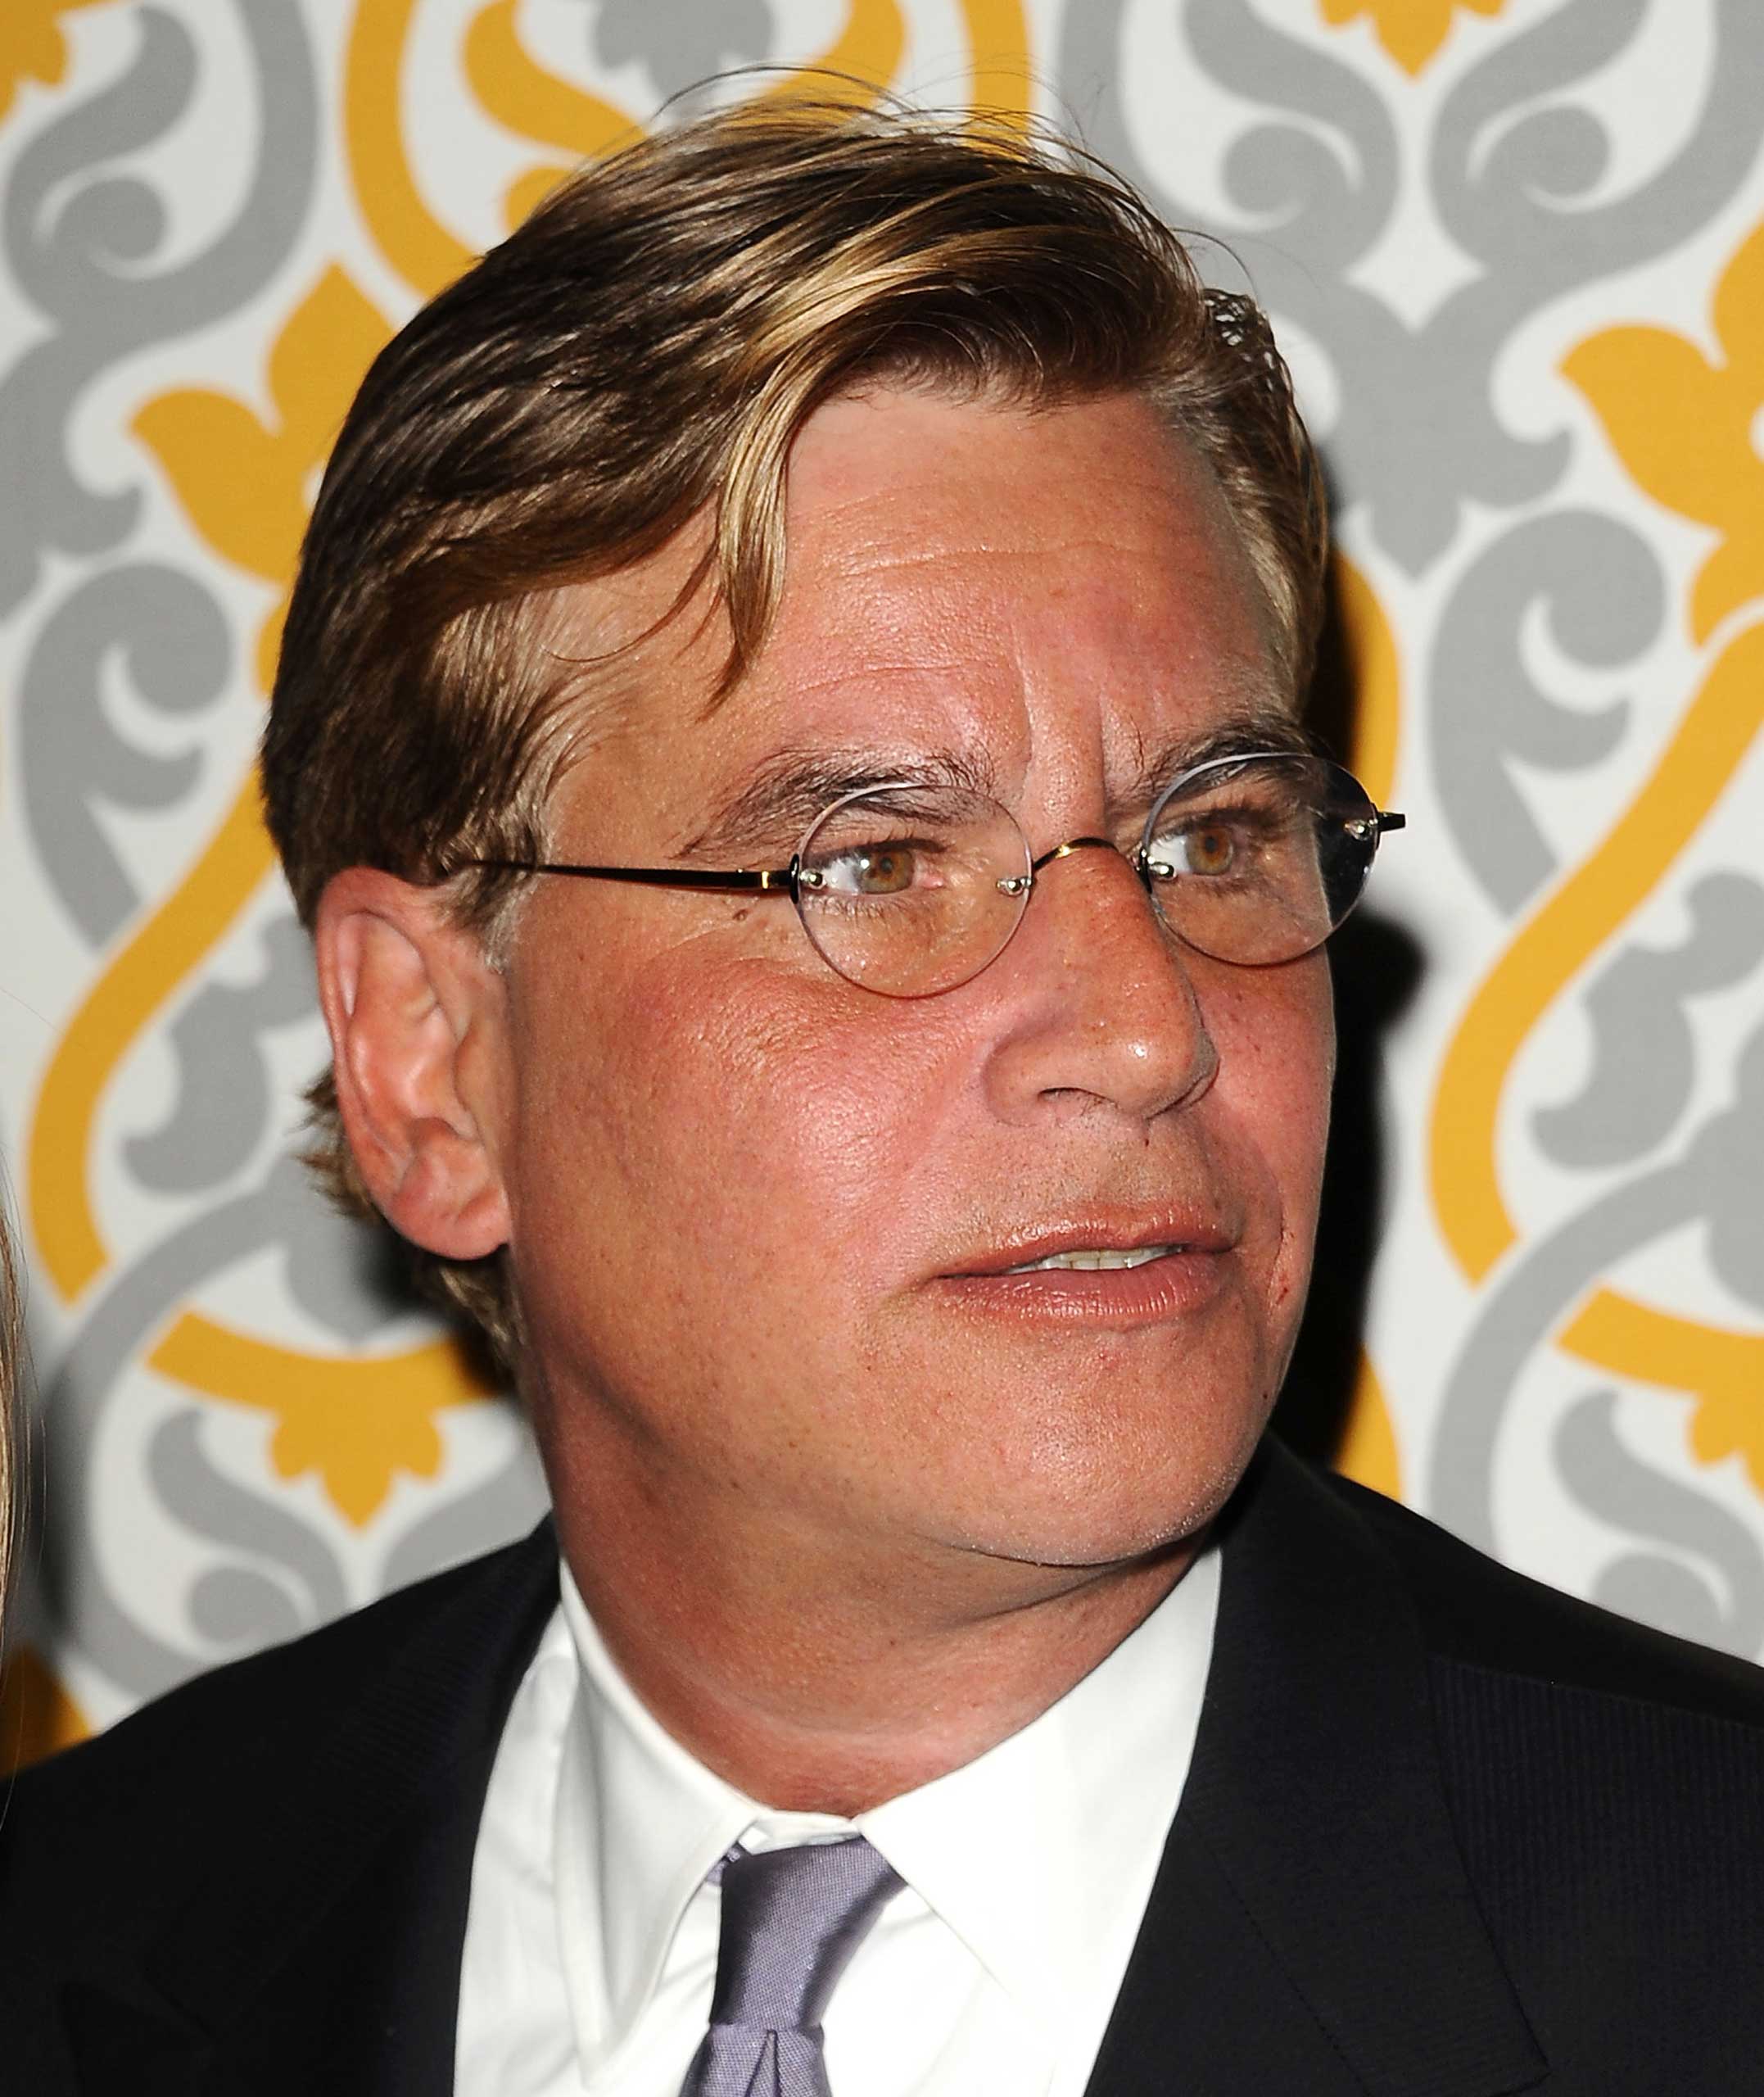 Writer Aaron Sorkin attends the premiere of "The Newsroom" at DGA Theater in Los Angeles on Nov. 4, 2014. (Jason LaVeris—FilmMagic/Getty Images)